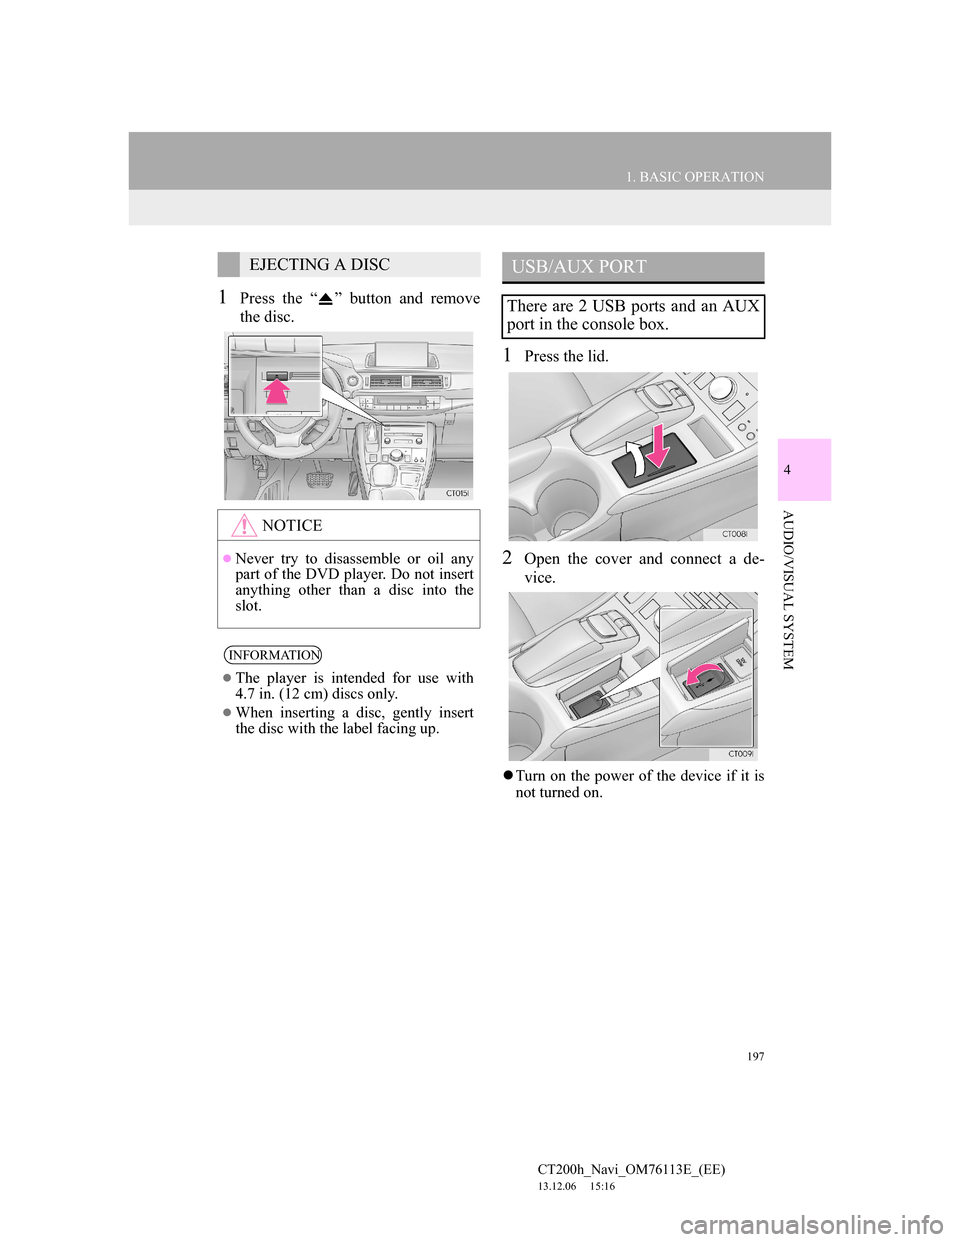 Lexus CT200h 2013  Navigation Manual (in English) 197
1. BASIC OPERATION
4
AUDIO/VISUAL SYSTEM
CT200h_Navi_OM76113E_(EE)
13.12.06     15:16
1Press the “ ” button and remove
the disc.
1Press the lid.
2Open the cover and connect a de-
vice.
Turn